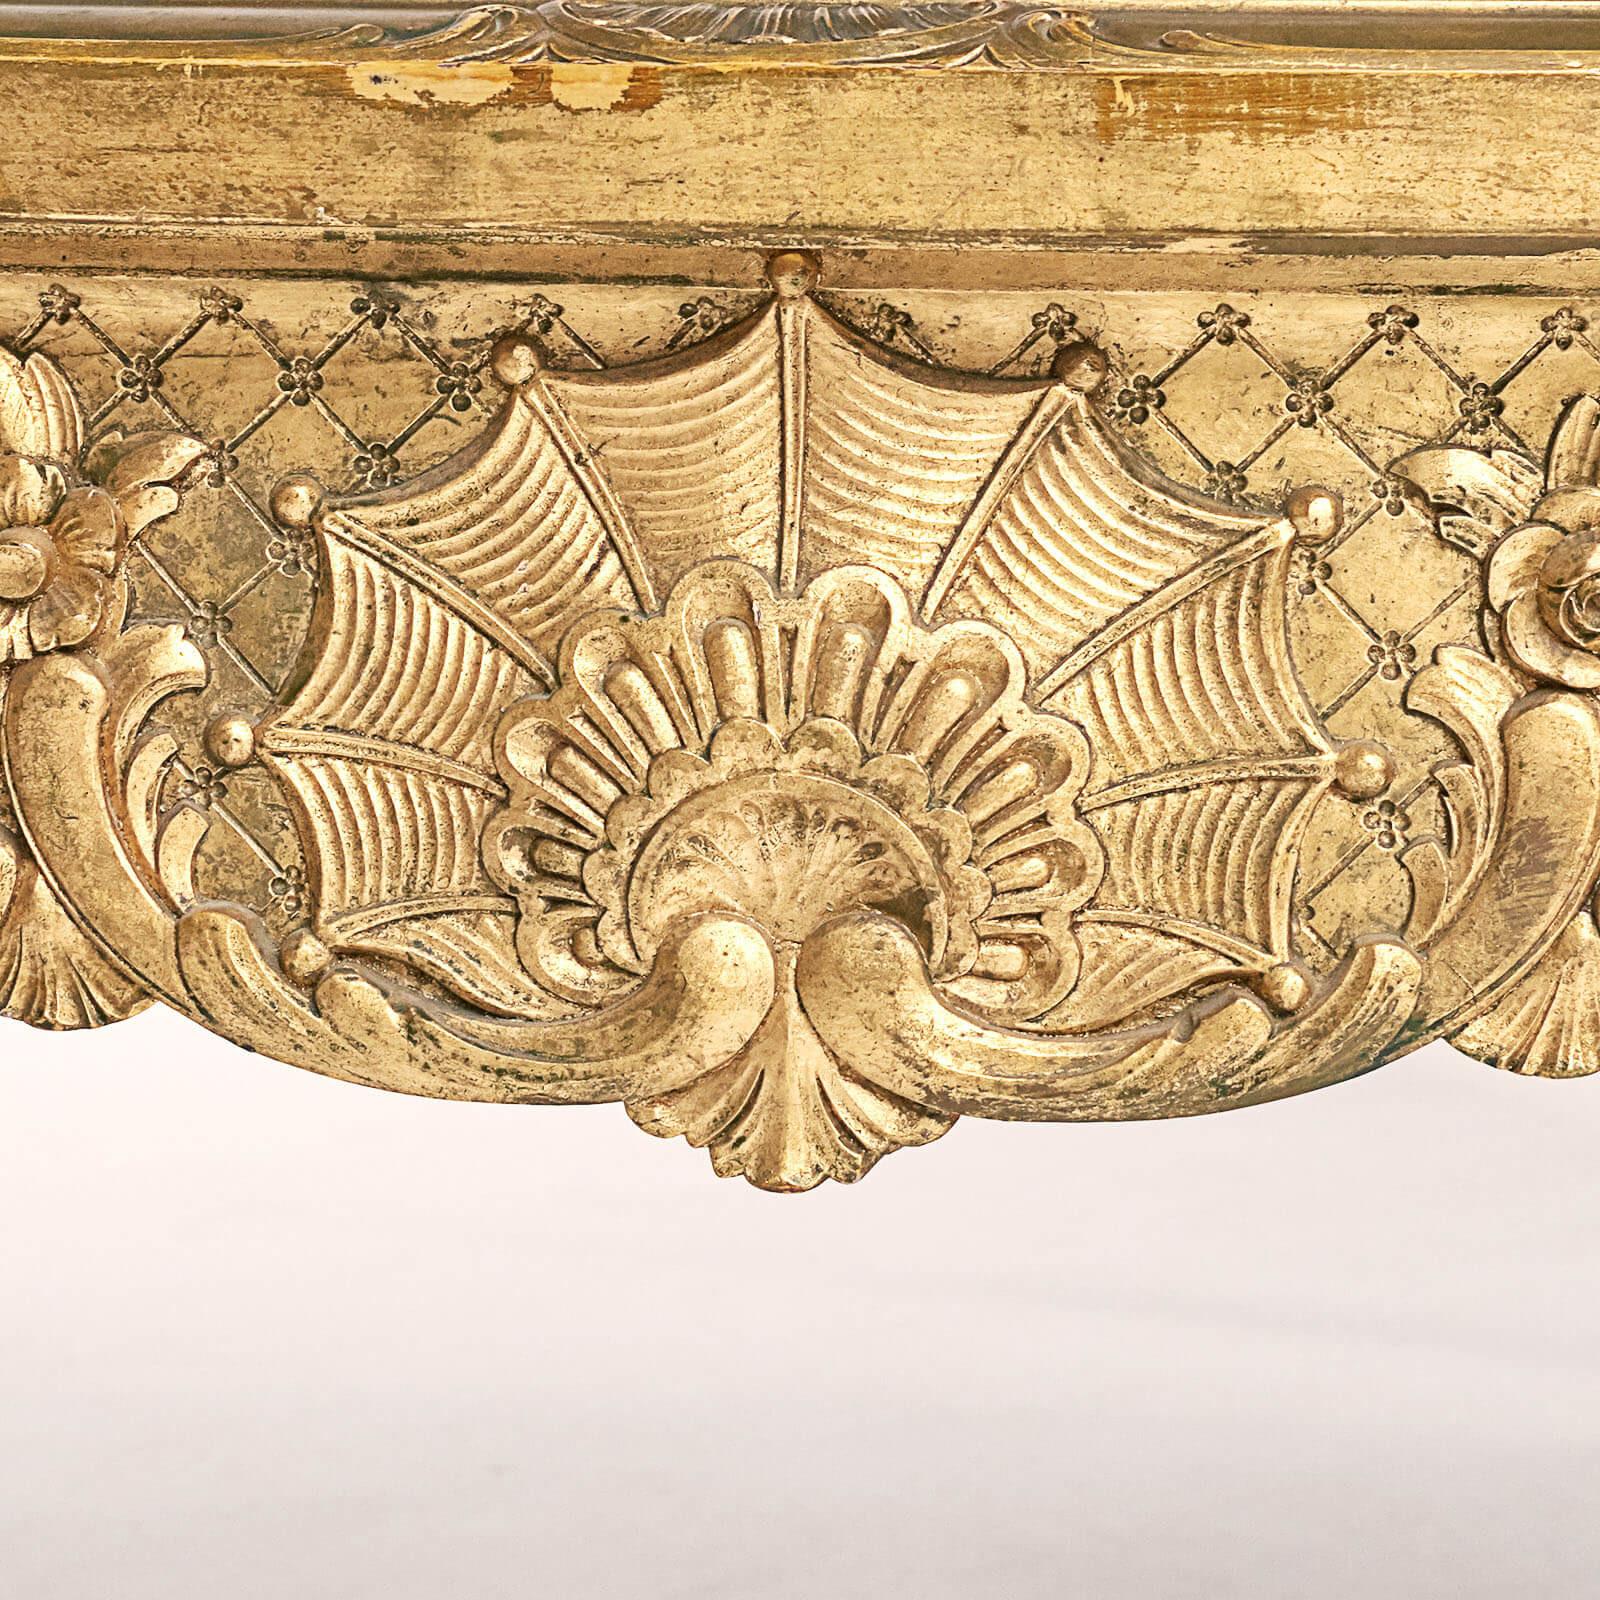 Rococo Royal Lounge Table from Fredensborg Palace